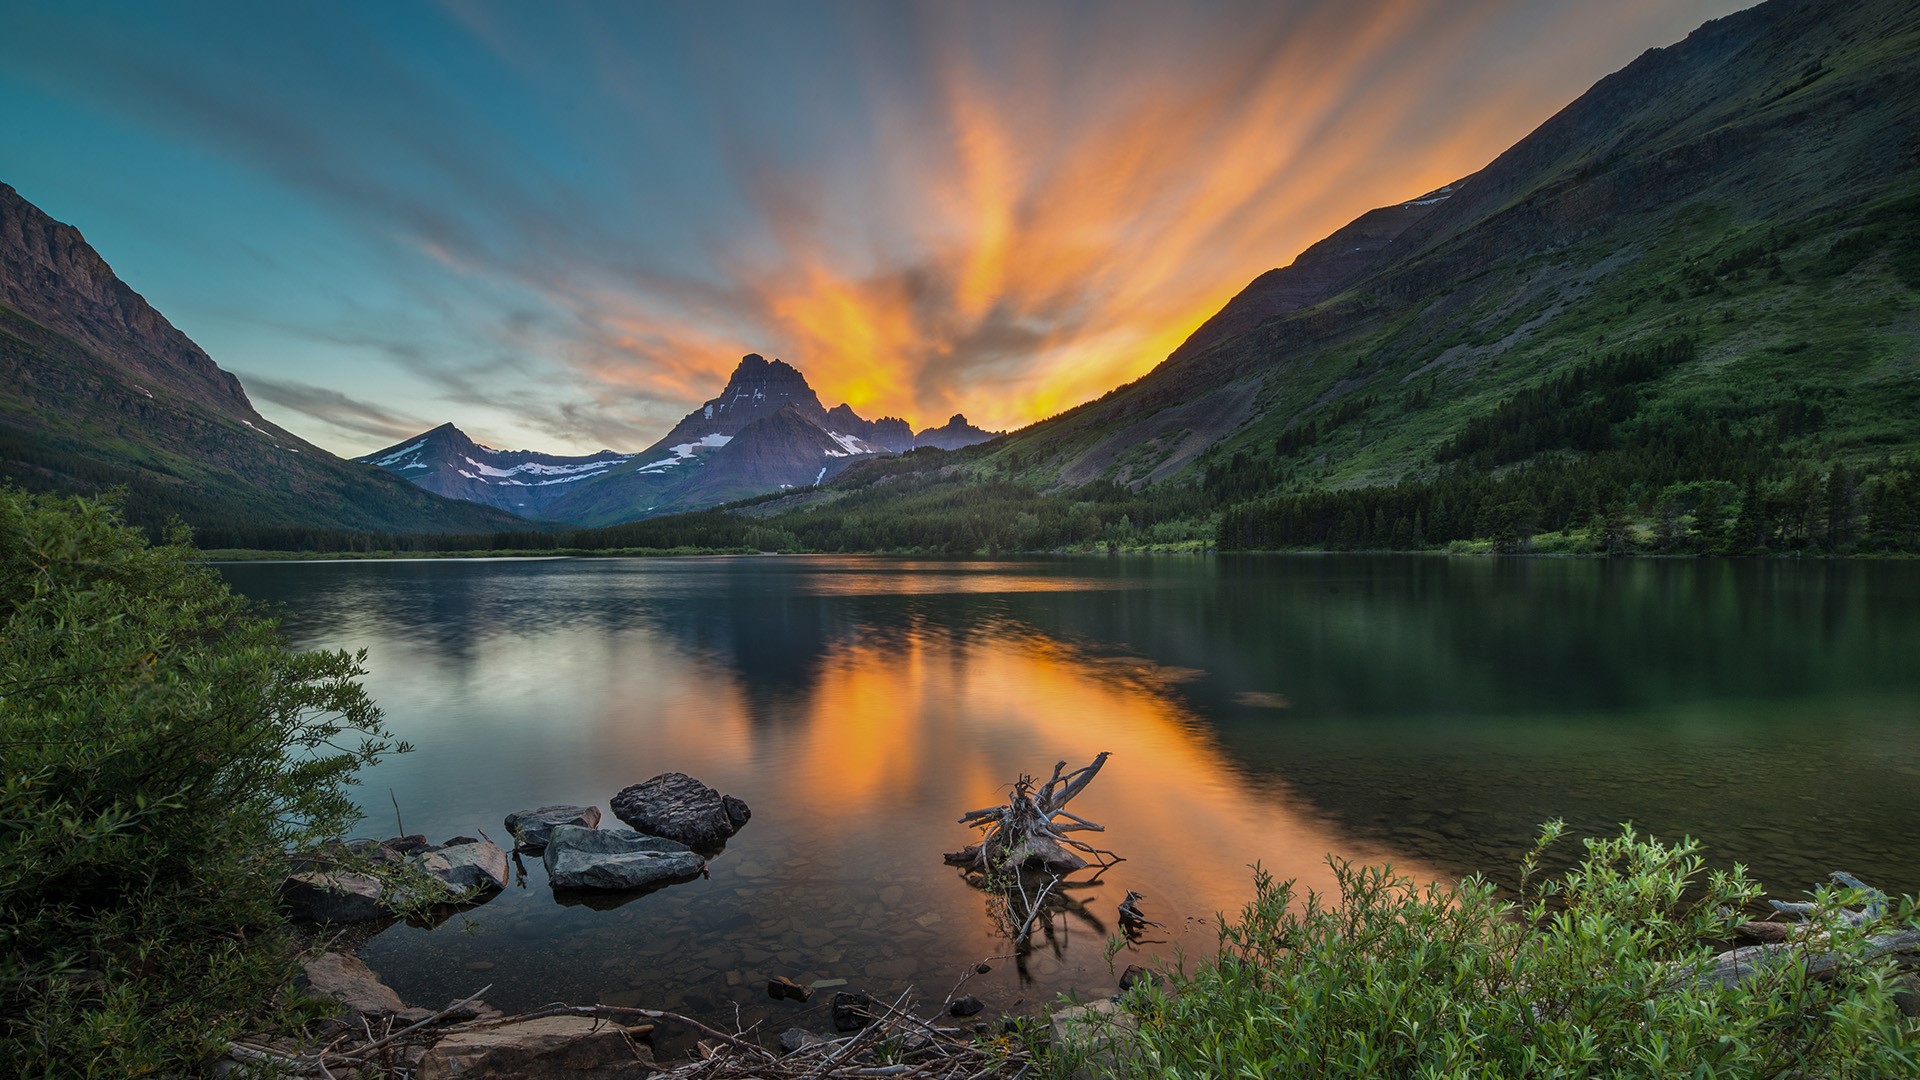 Nature Landscape Clouds Sky Sunset Water Rocks Plants Trees Lake Mountains Swiftcurrent Lake Glacier 1920x1080